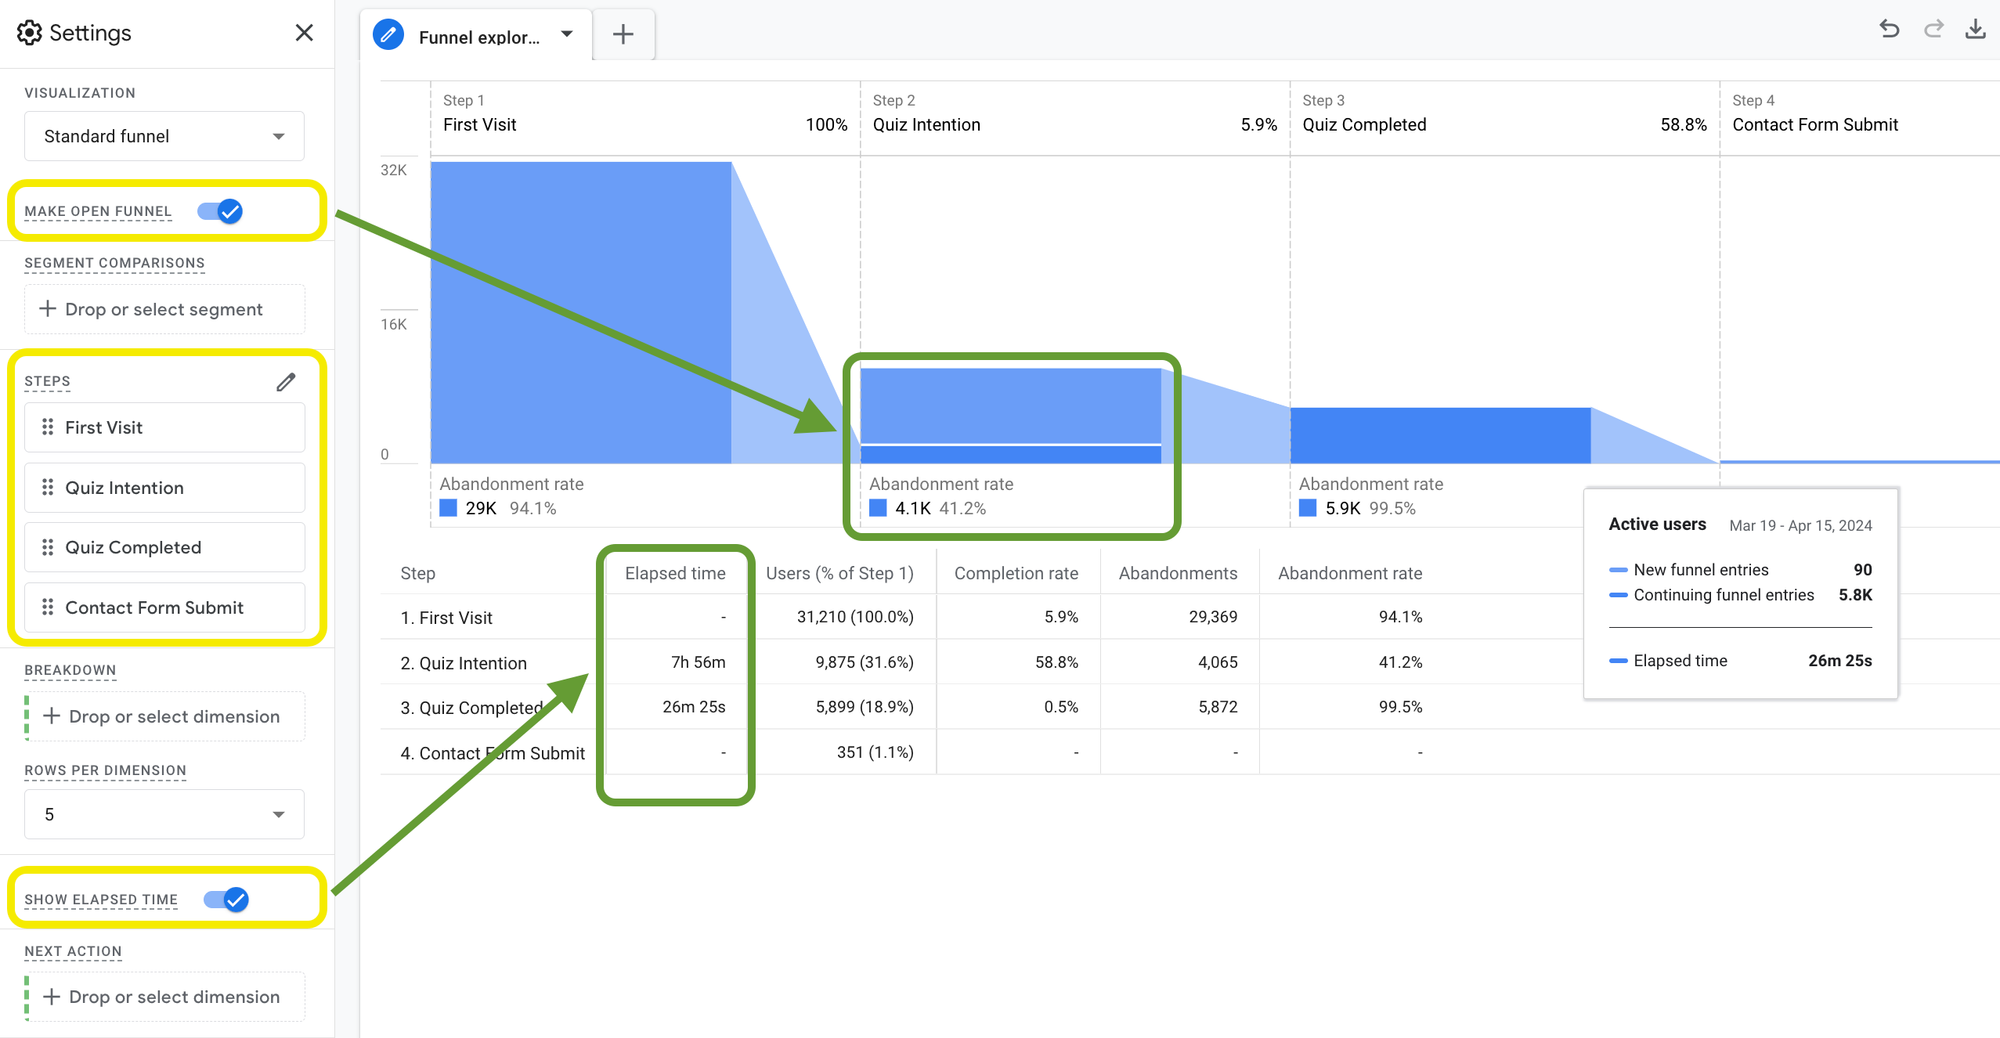 How to Create a Funnel Exploration for SaaS and B2B in Google Analytics 4?